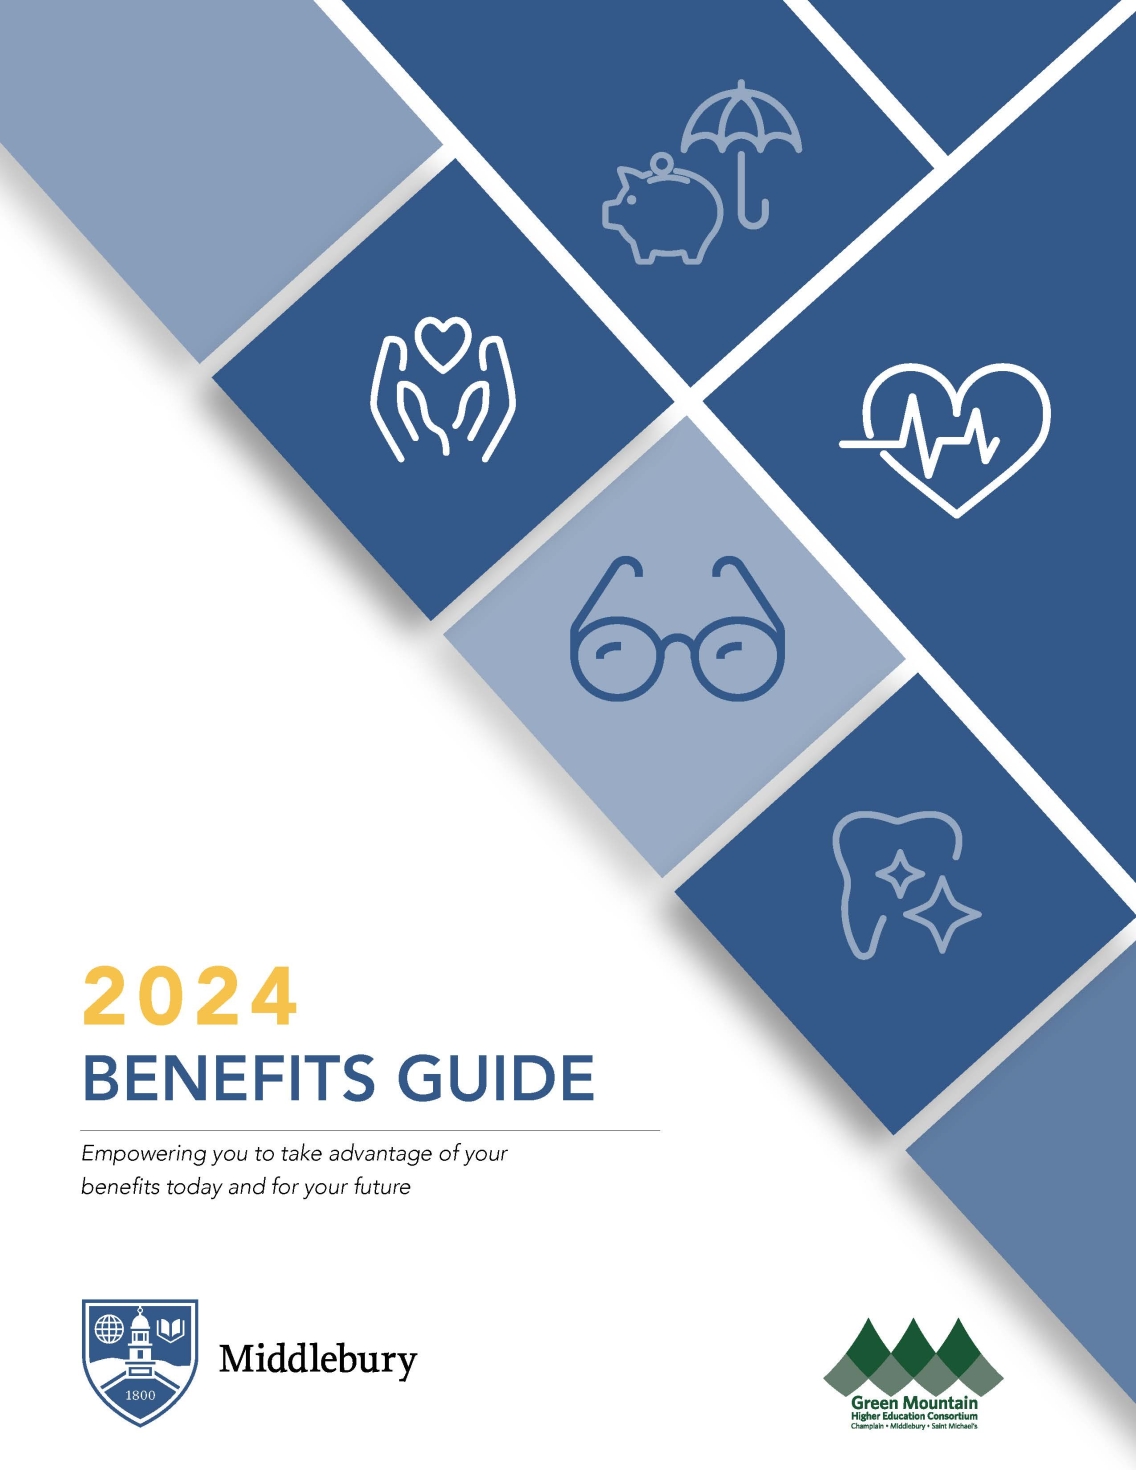 An image of the cover of the 2024 Middlebury College Benefits Guidebook featuring the text, "2024 Benefits Guide. Empowering you to take advantage of your benefits today and for your future."